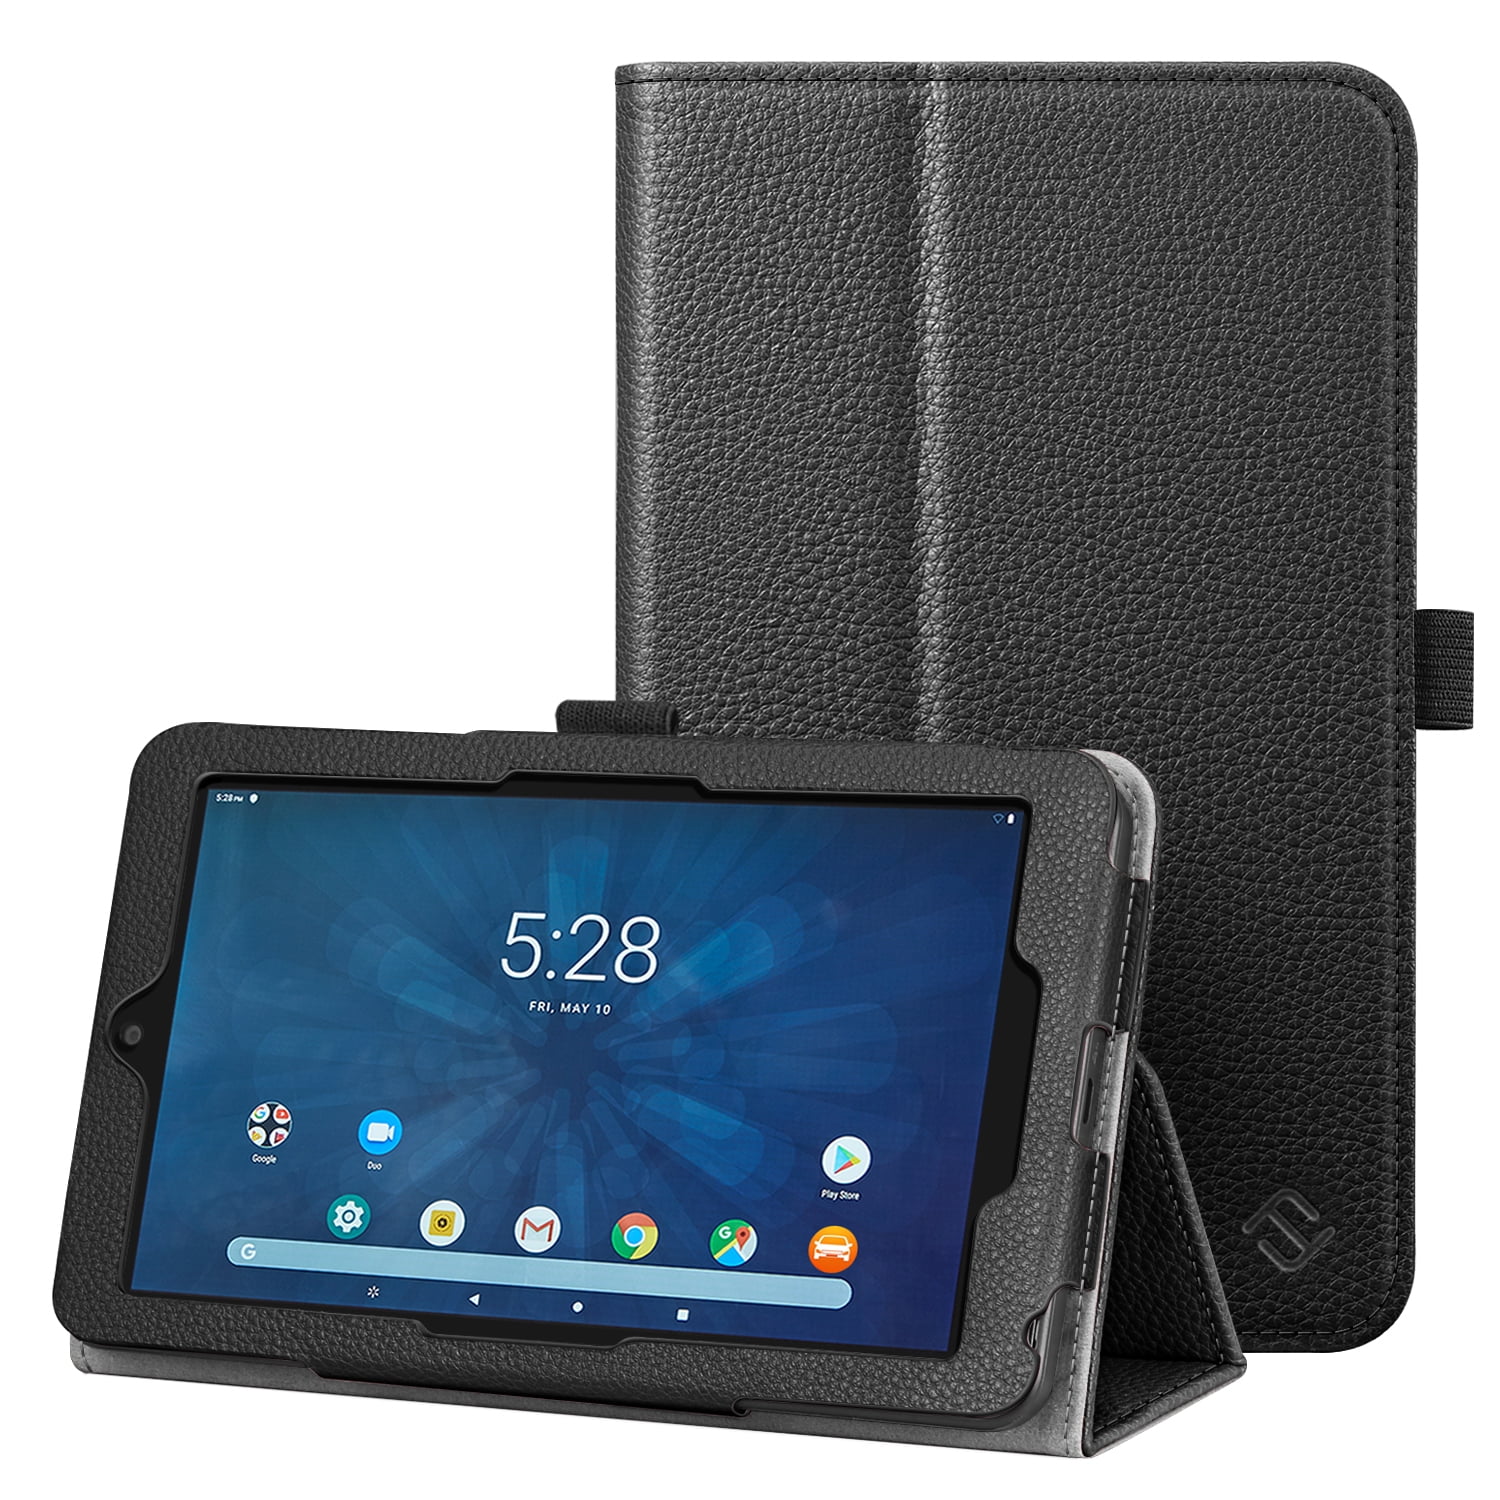 Gewaad Voorvoegsel inkt Tablet Case for Onn 7" 7 Inch Android Tablet - Fintie Protective Folio  Cover With Stylus Holder, Black - Walmart.com